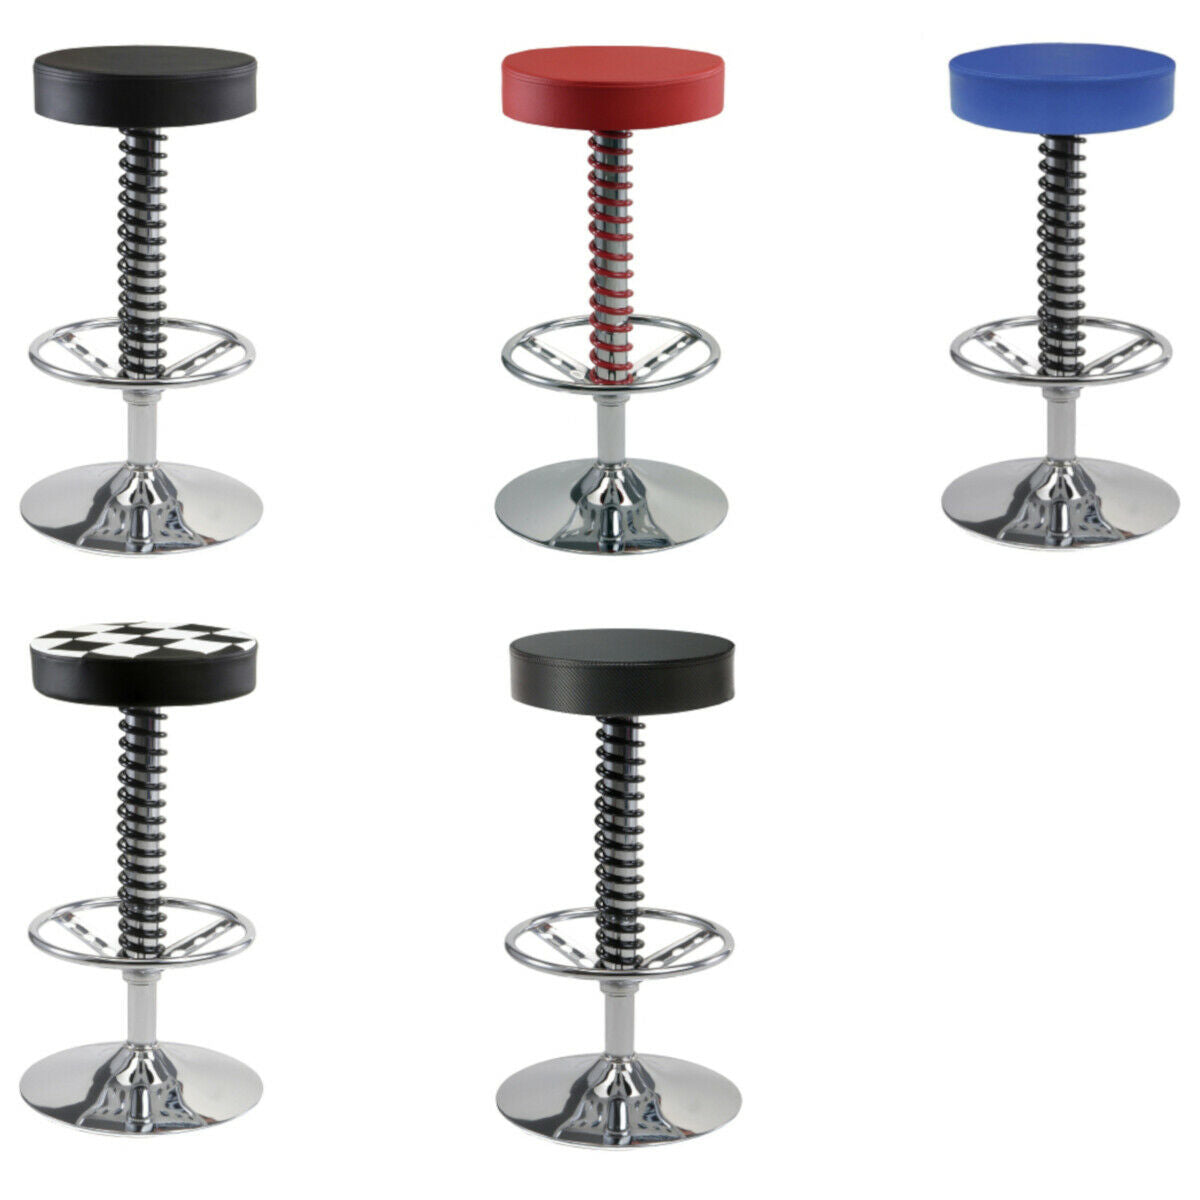 Pitstop Furniture Automotive Themed Pit Crew Bar Stool